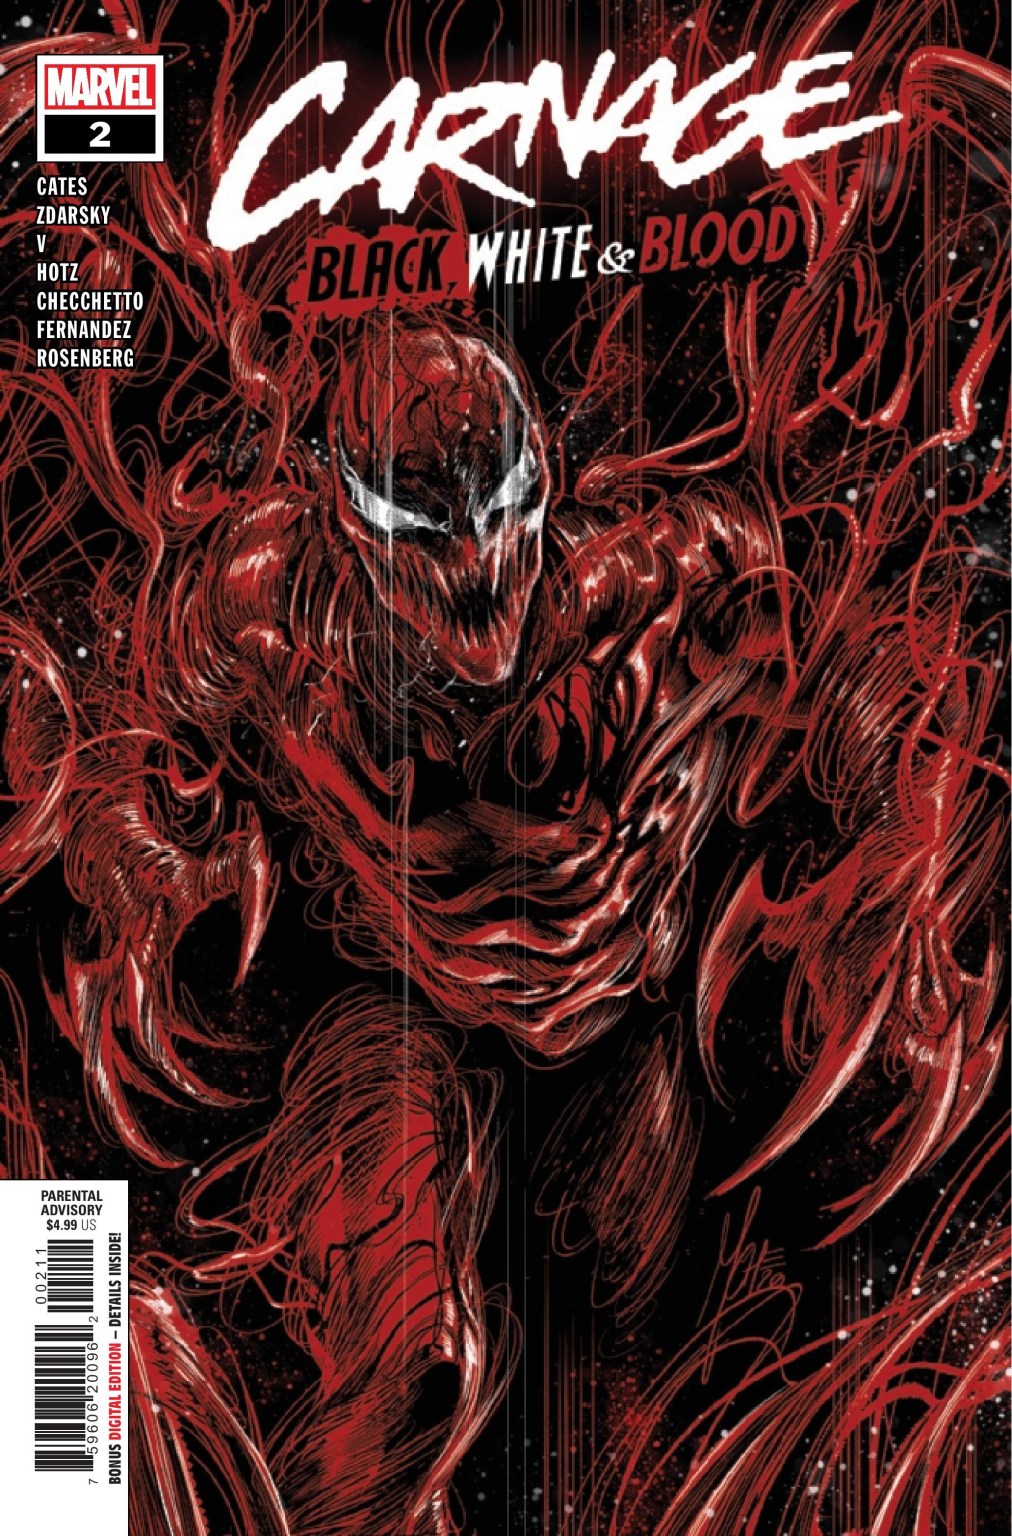 Carnage: Black, White & Blood #2 preview